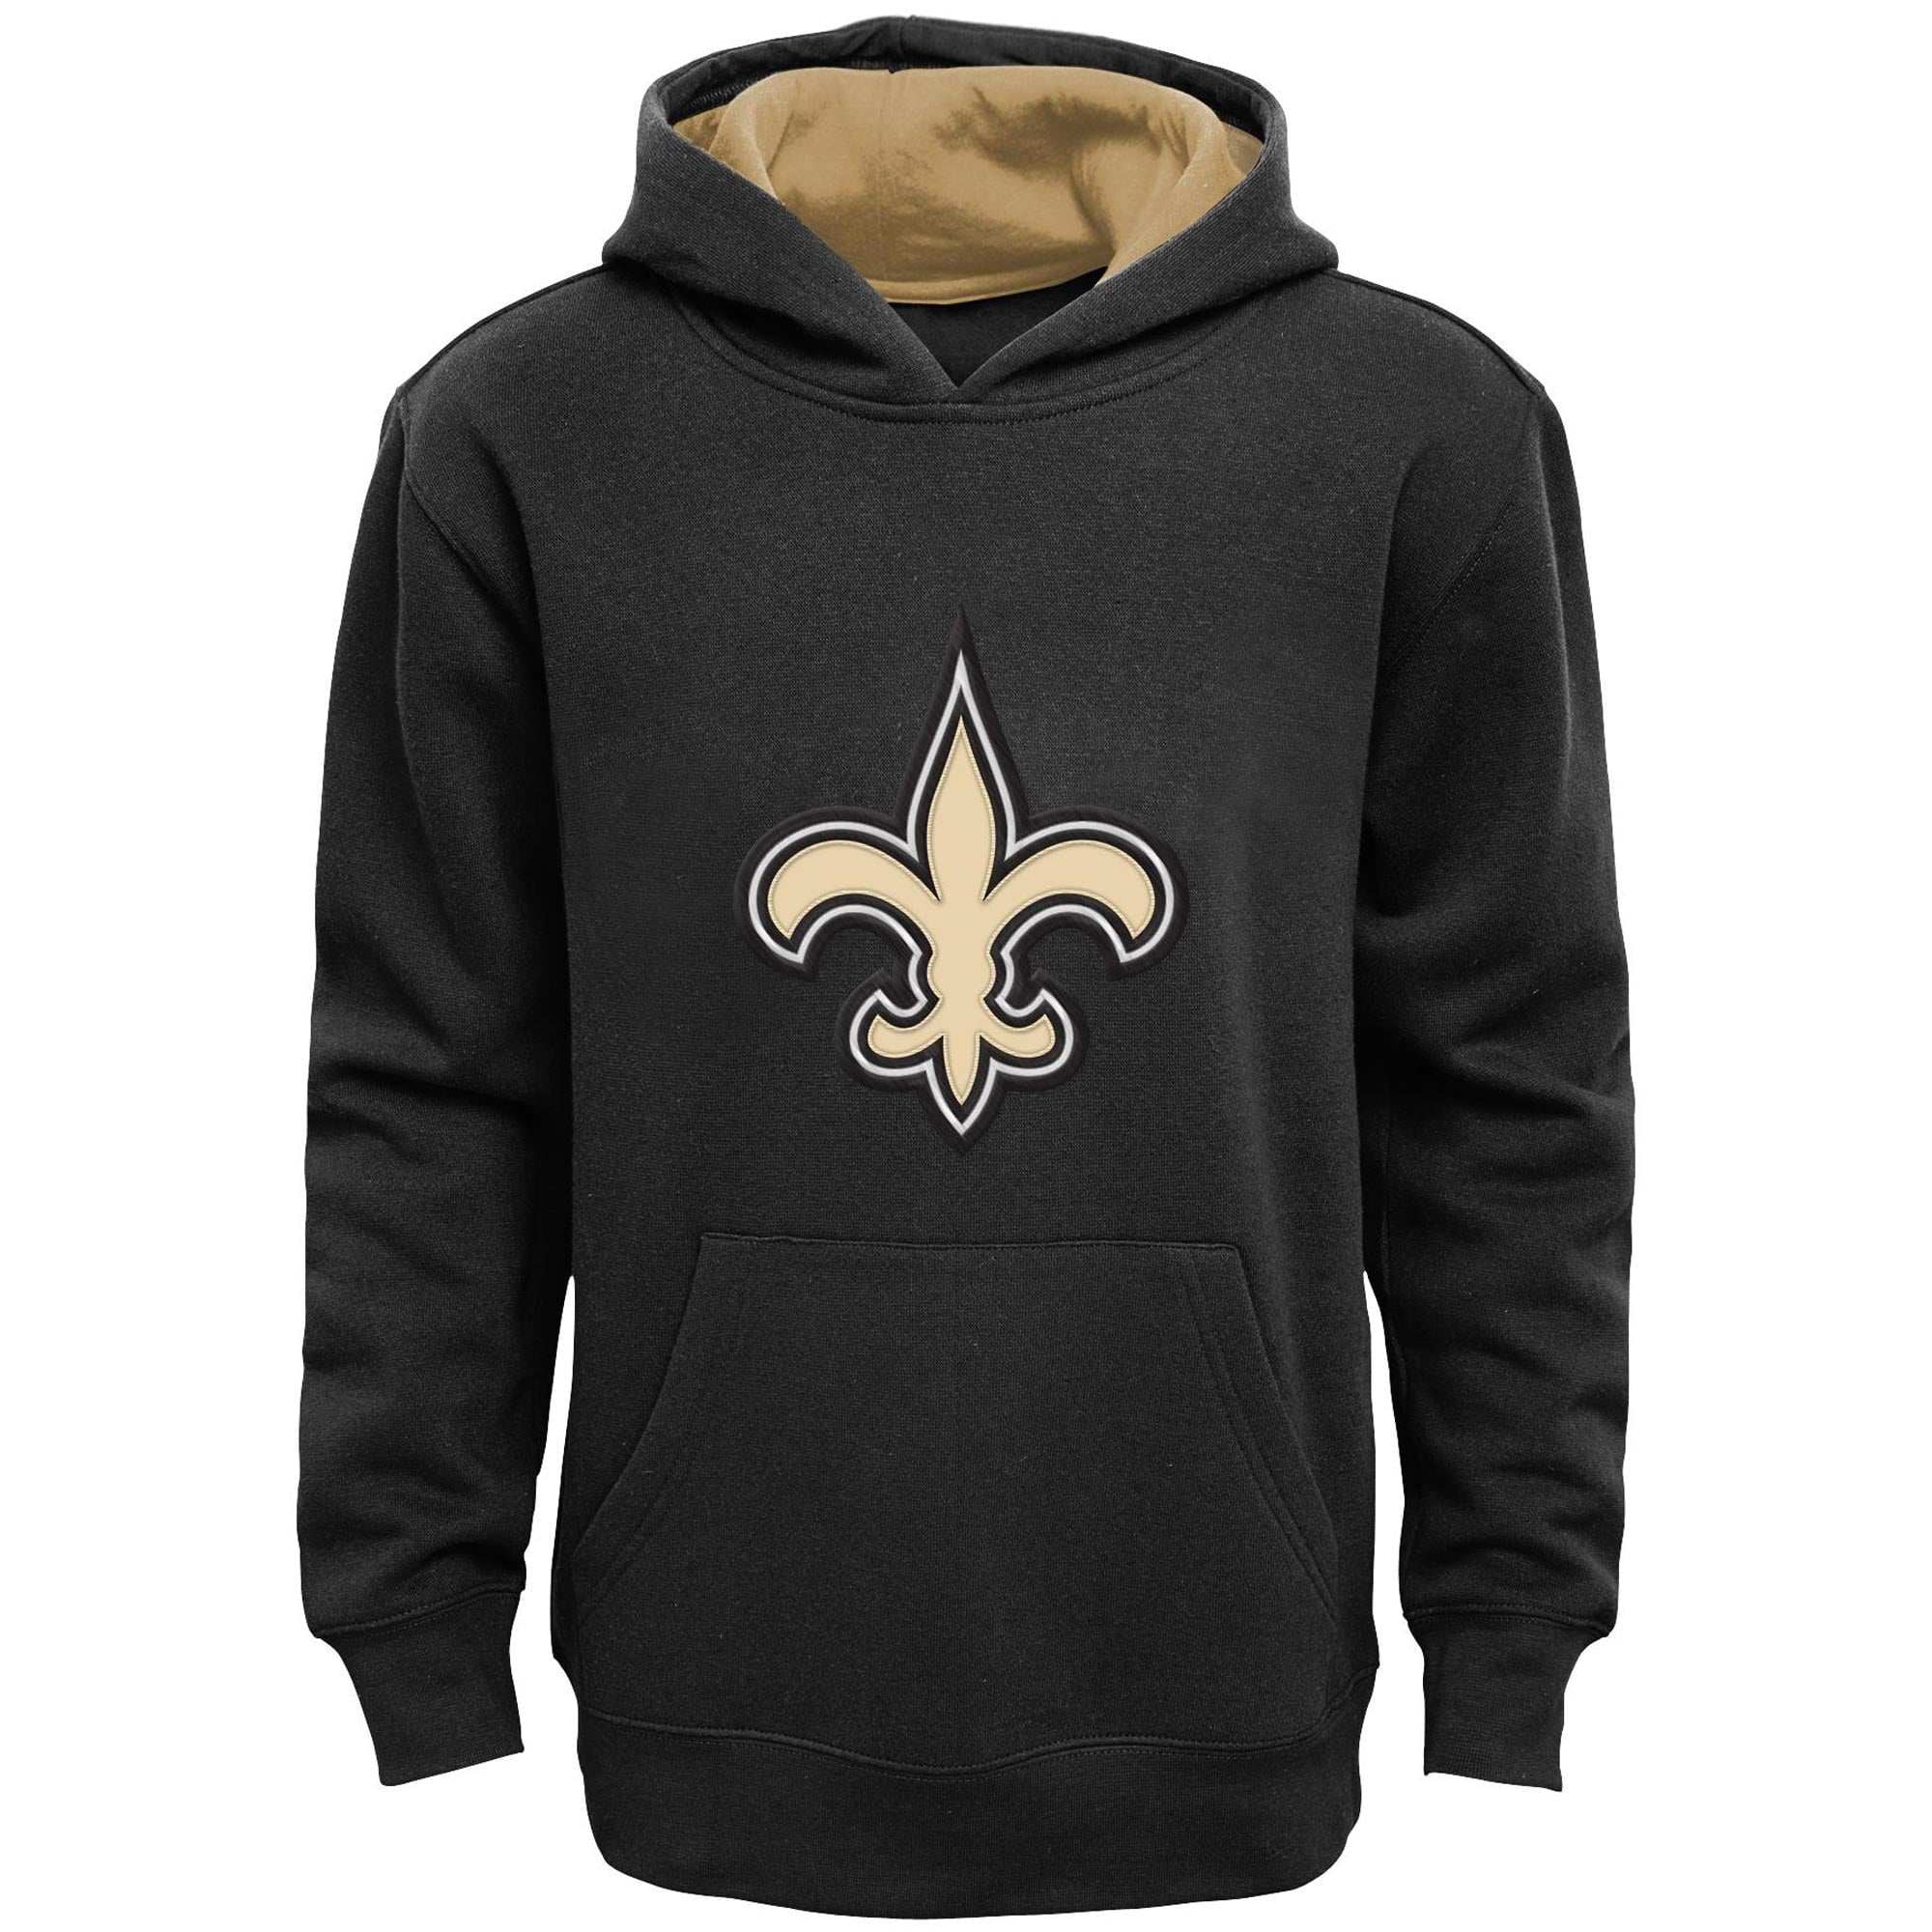 New Orleans Saints Youth Fan Gear Prime Pullover Hoodie - Black ...